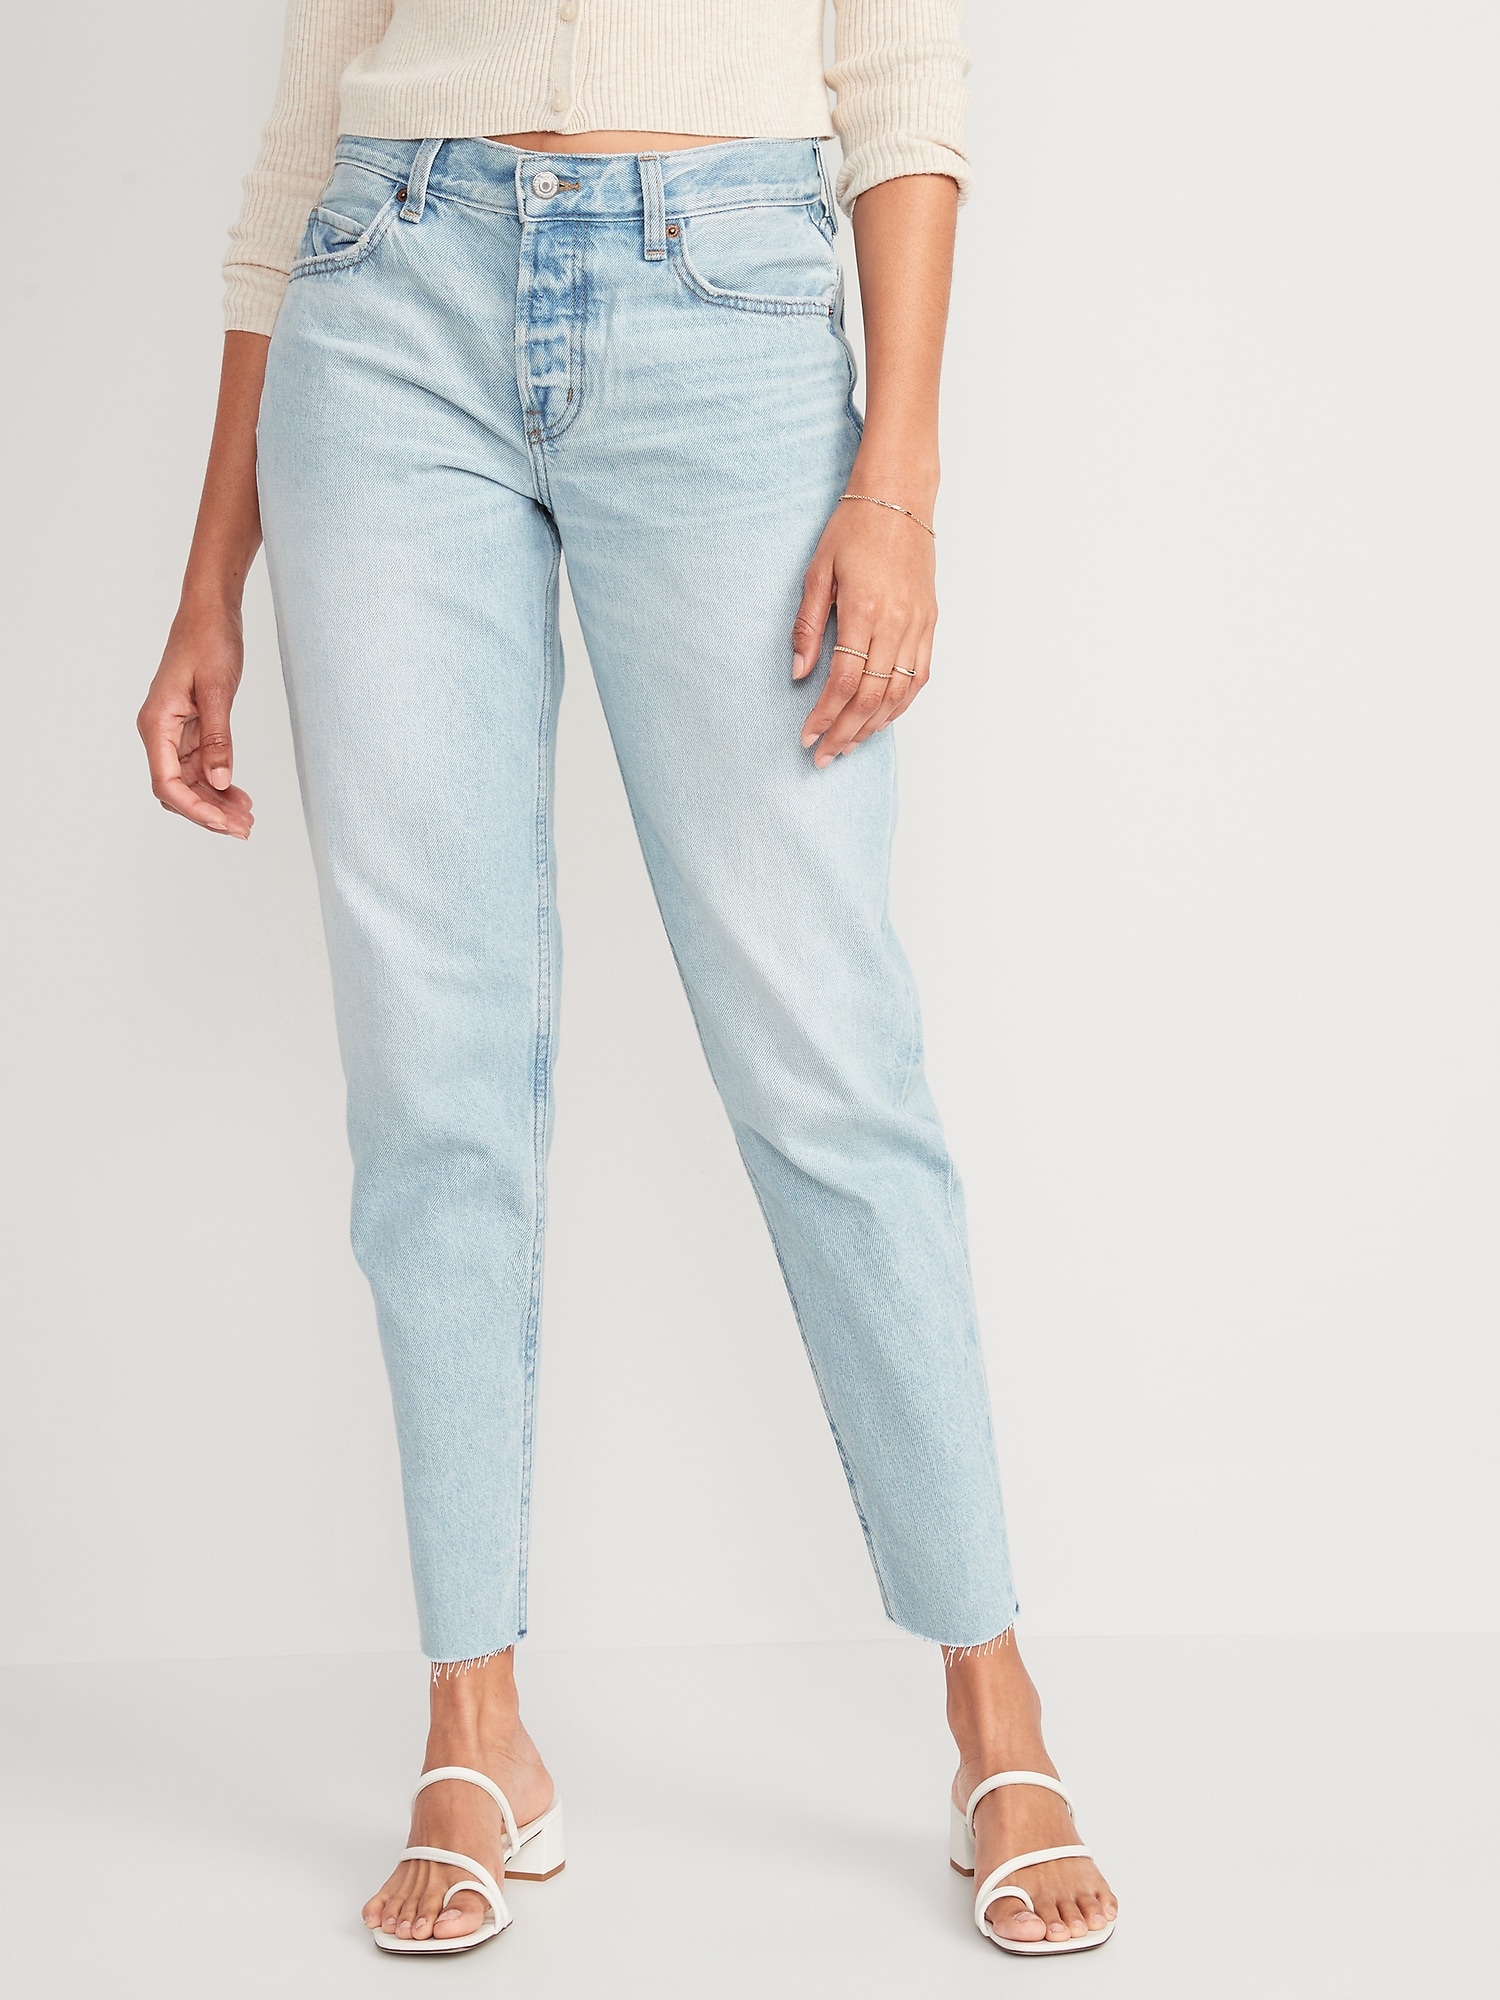 Women's Tapered Jeans: high waist, narrow at the ankle